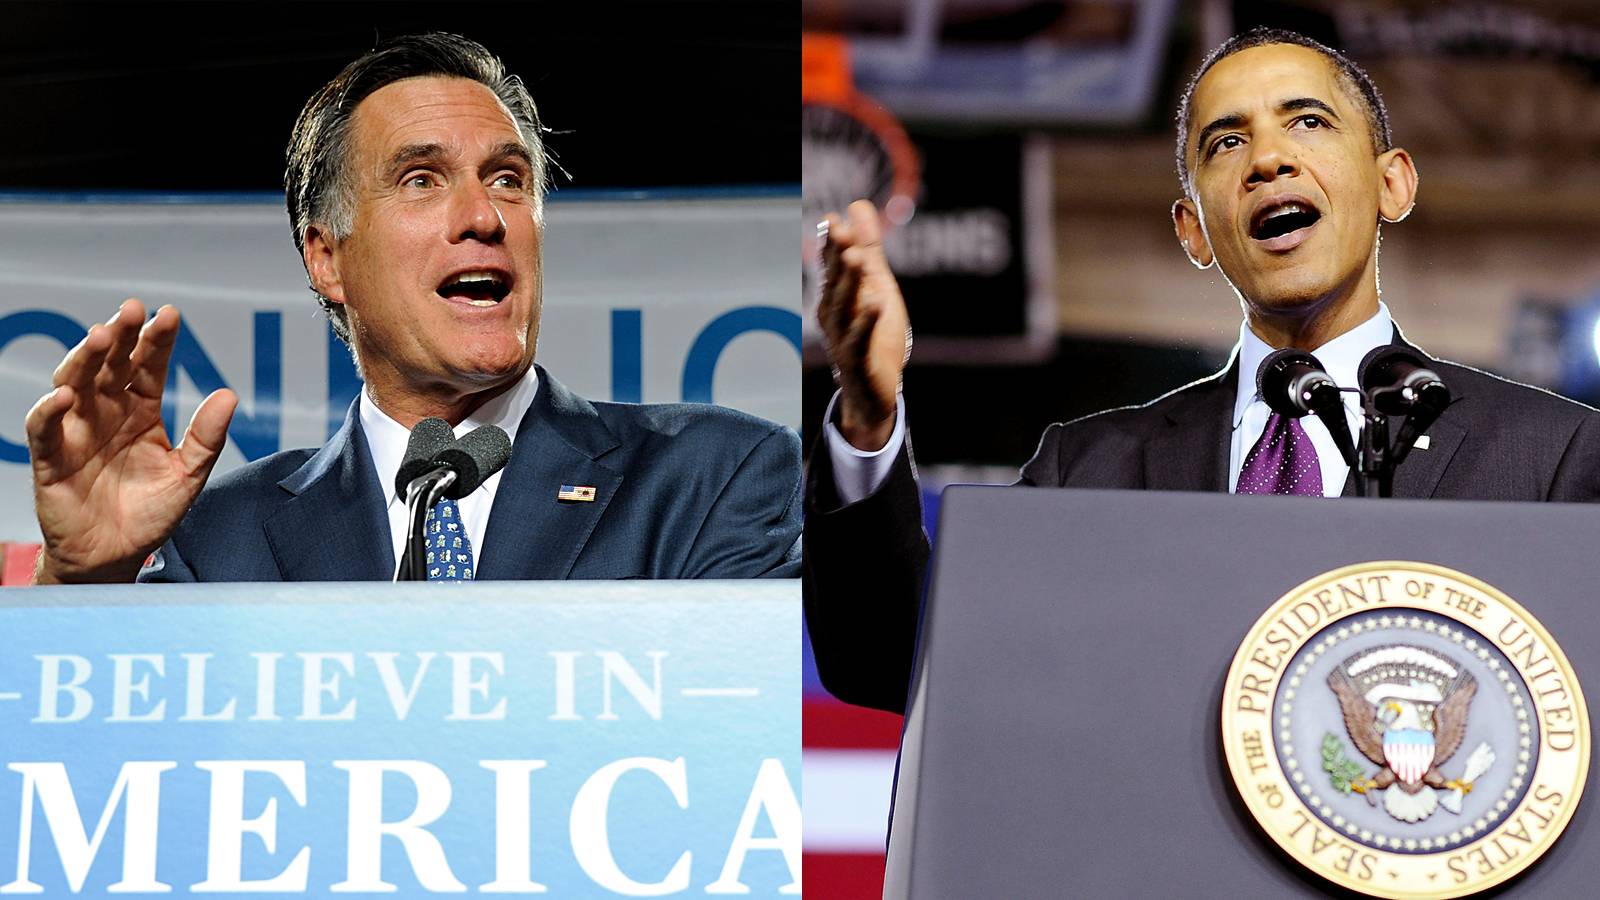 Obama vs. Romney - Mitt Romney is gaining ground on President Obama, according to a Reuters/Ipsos poll released Jan. 10. Obama leads Romney by 48 percent to 43 percent, compared to 48 percent to 40 percent a month ago.&nbsp;(Photos from Left to right: Ethan Miller/Getty Images, EPA/CJ GUNTHER /LANDOV)